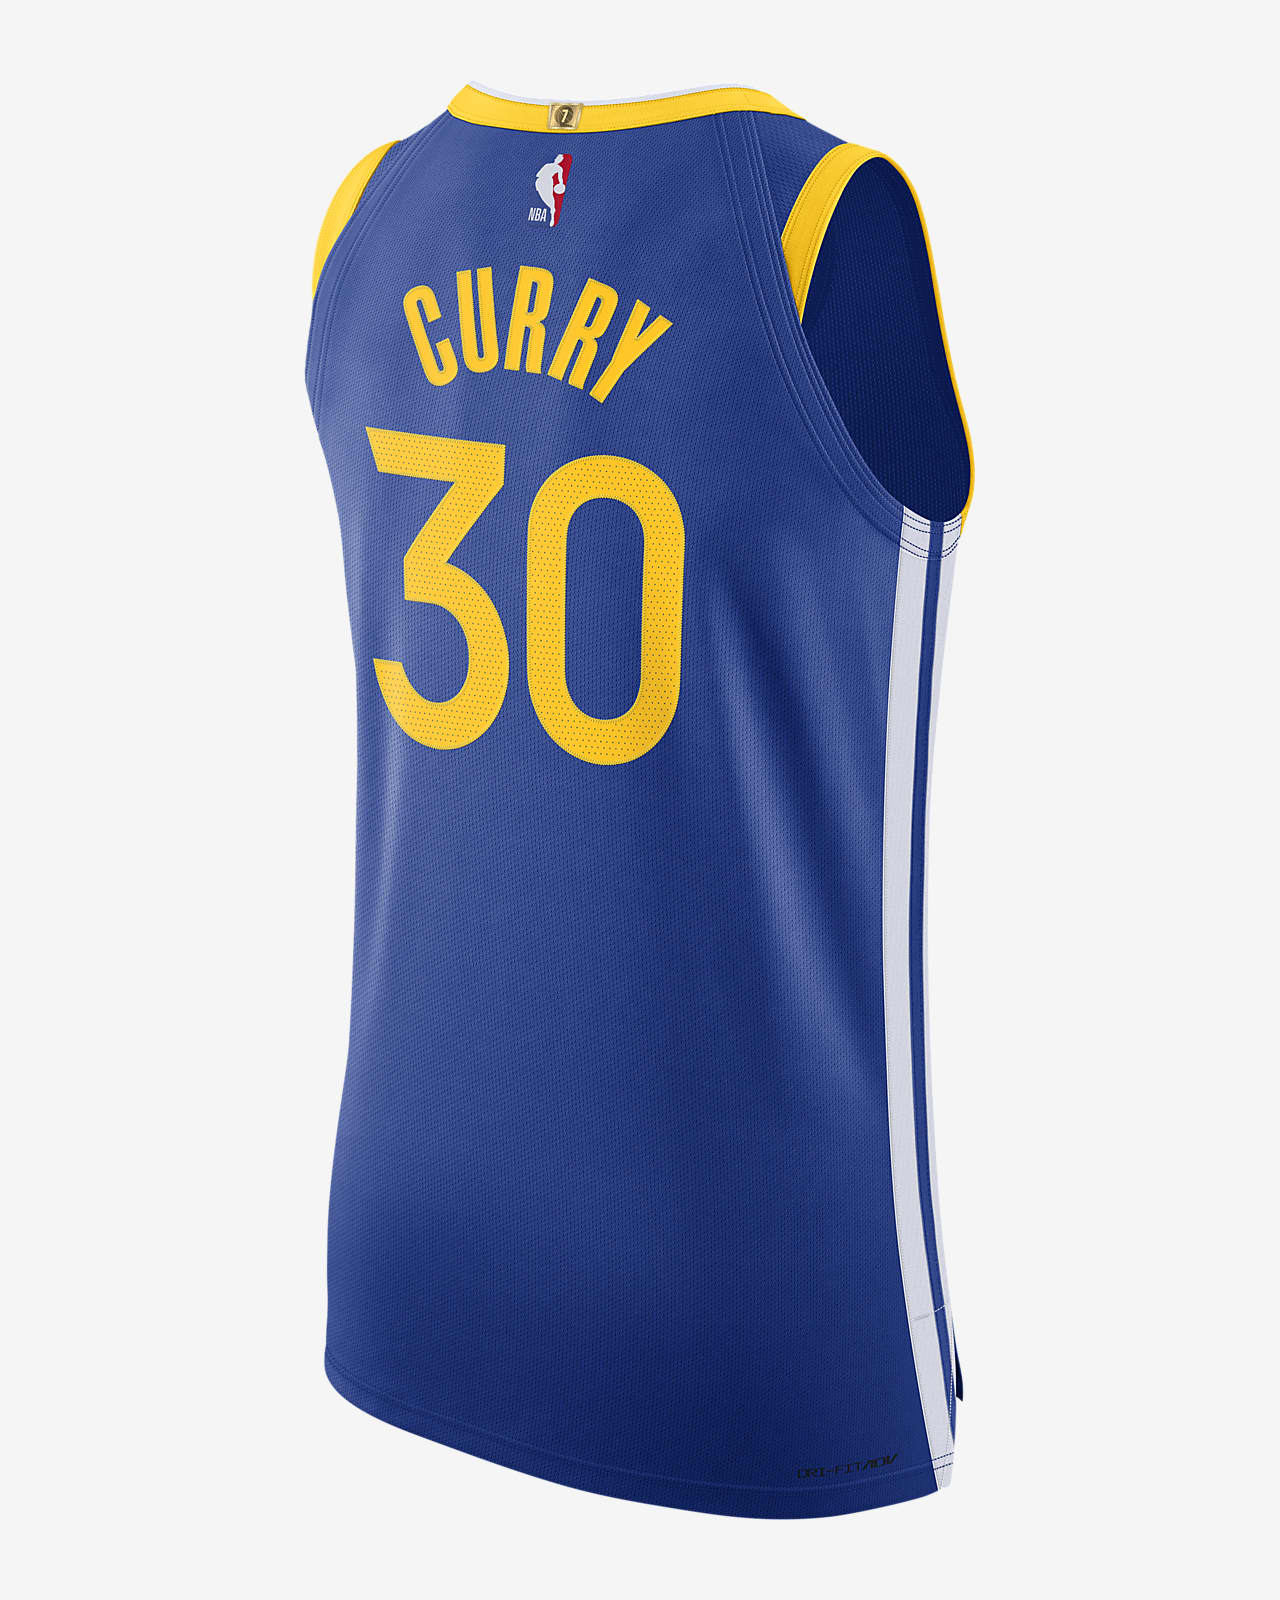 Complacer acoplador tanto Camiseta Nike NBA Authentic Stephen Curry Warriors Icon Edition 2020.  Nike.com